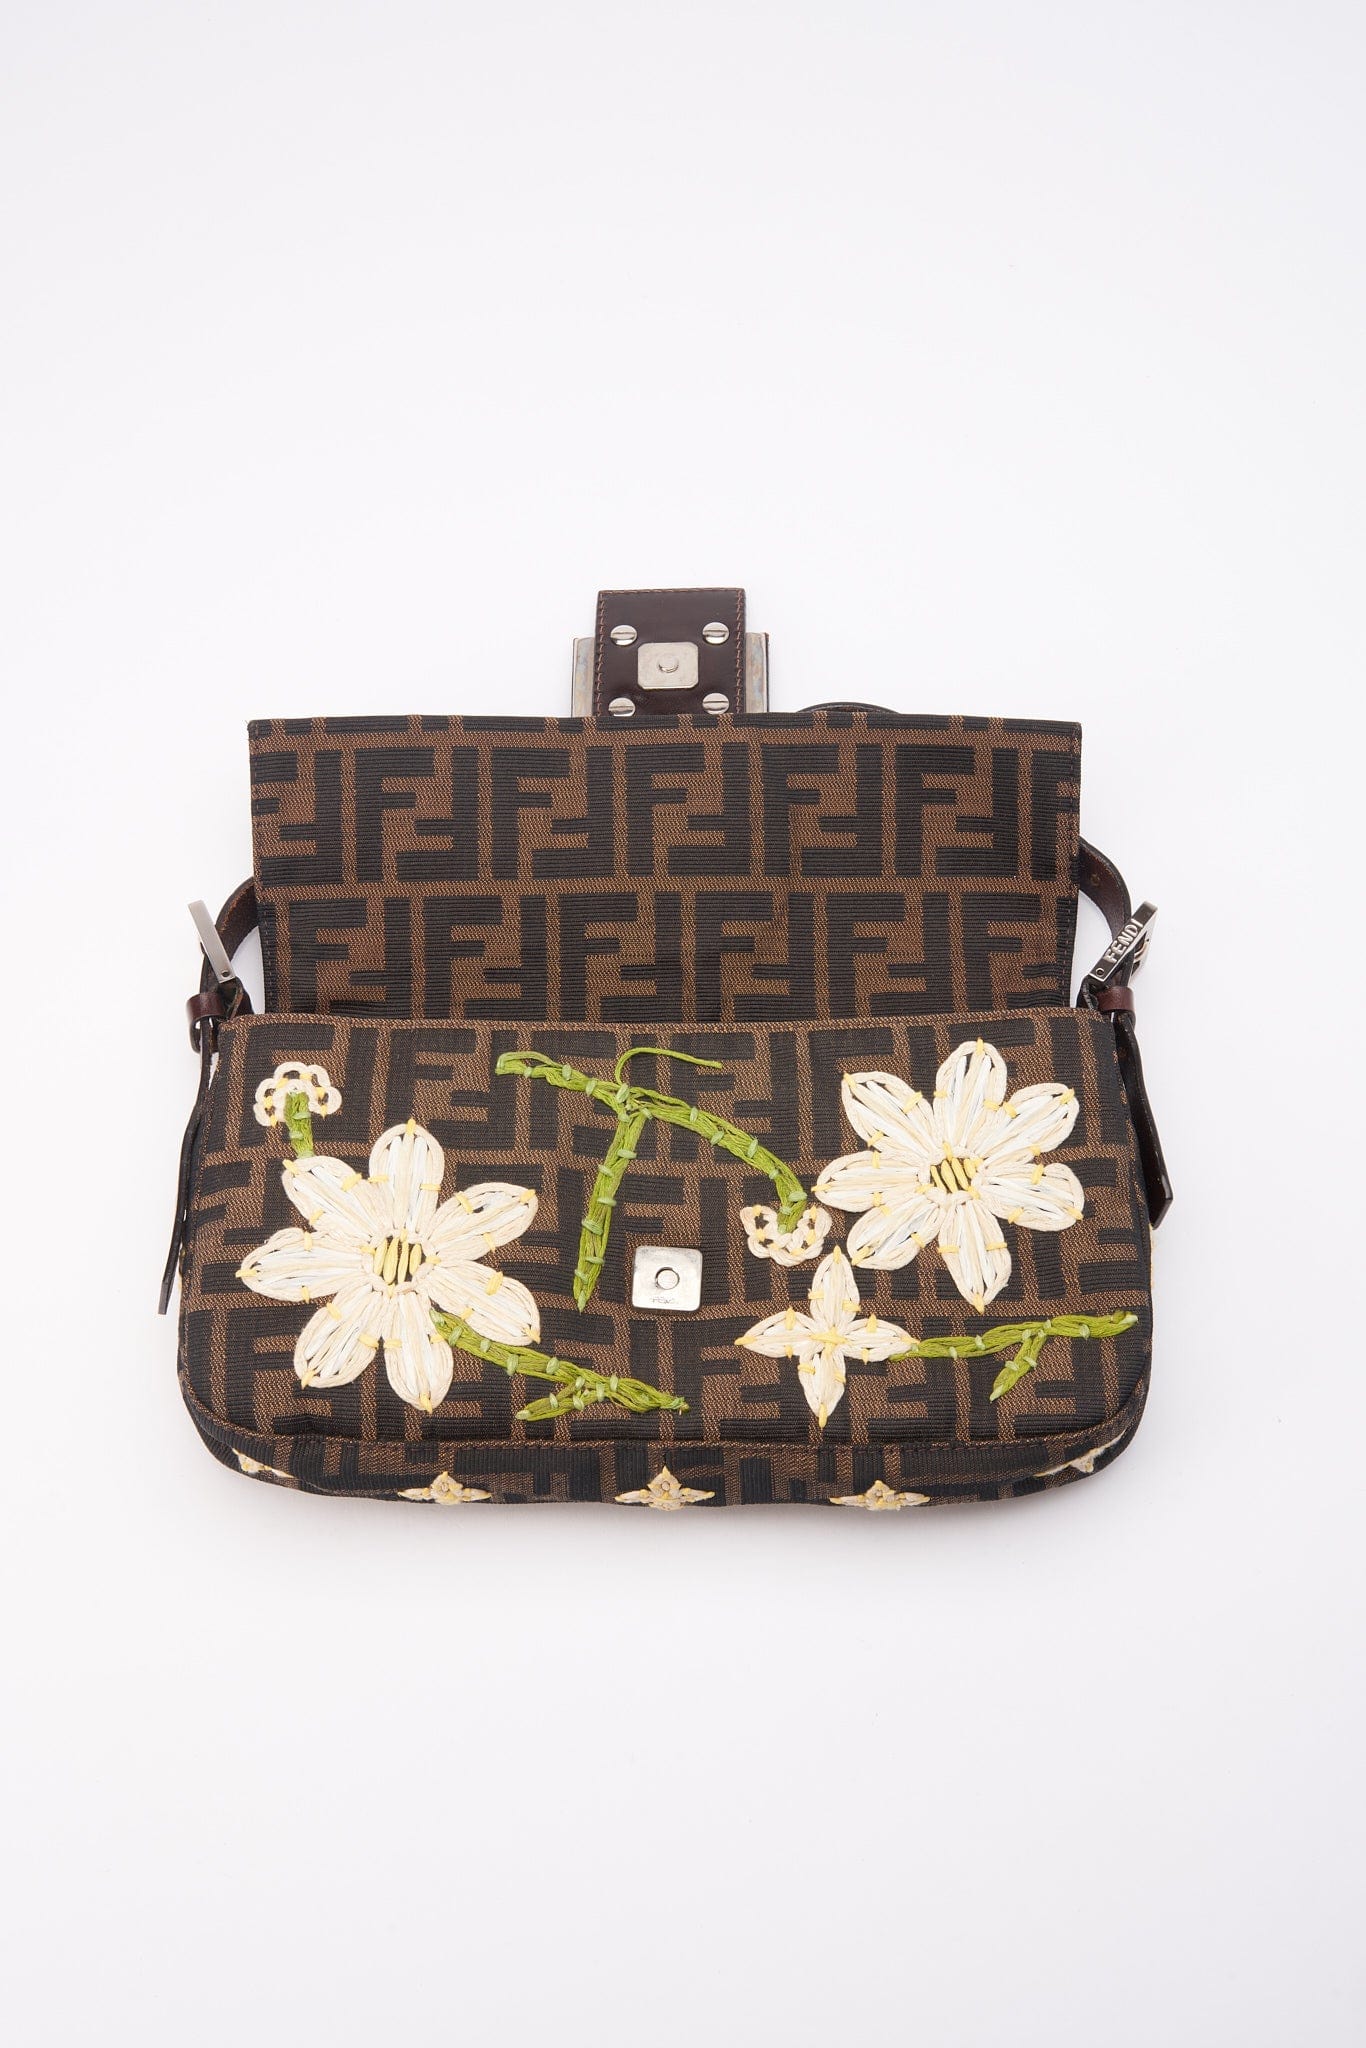 Vintage Fendi Zucca Baguette With Embroidered Flowers